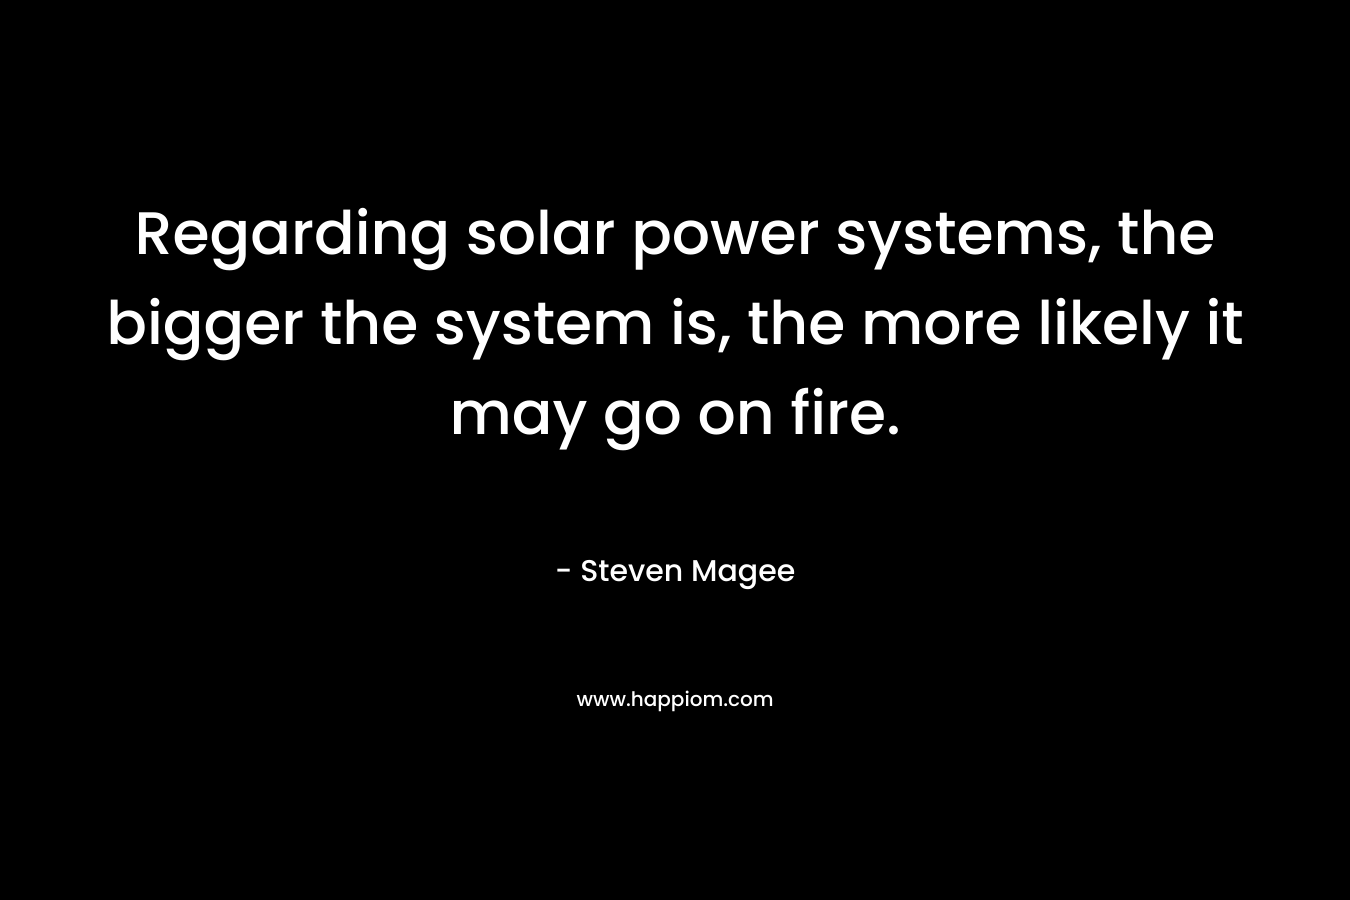 Regarding solar power systems, the bigger the system is, the more likely it may go on fire.